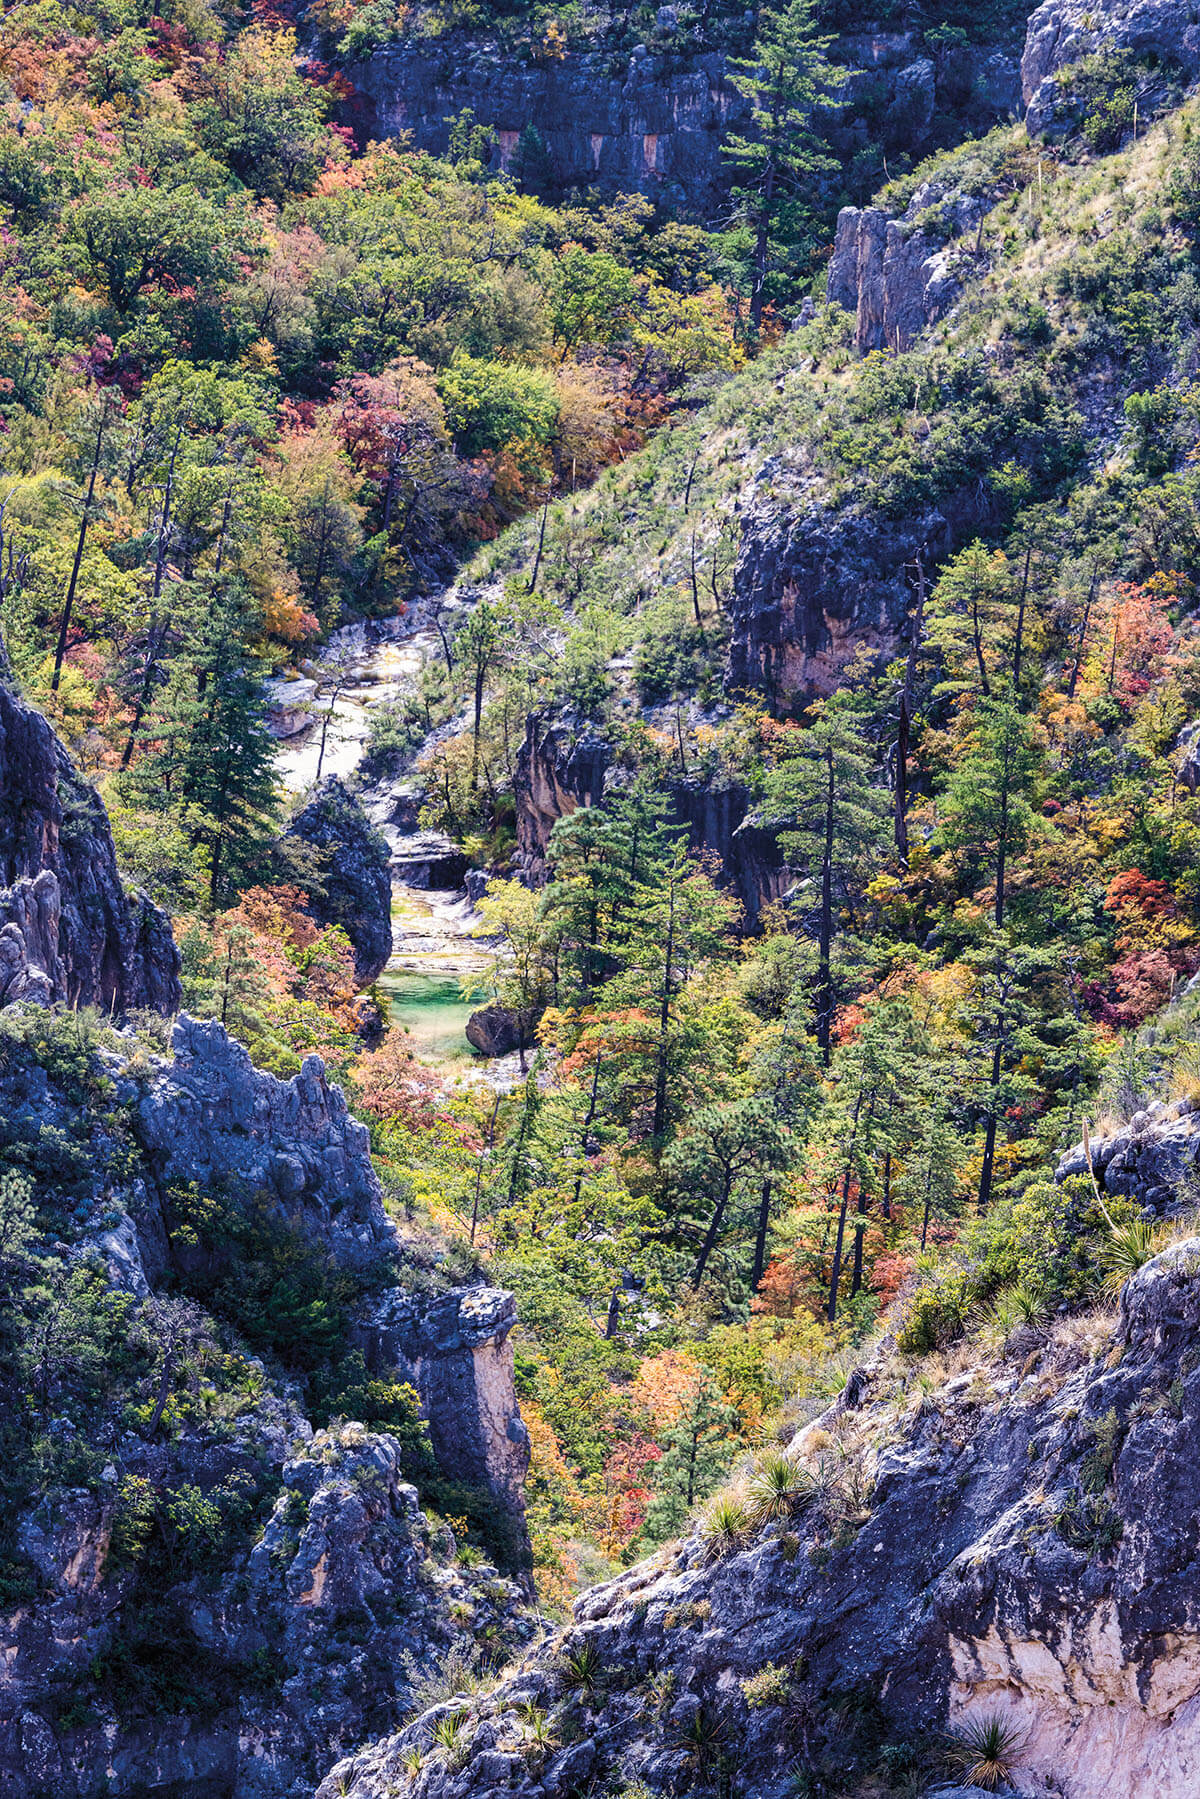 A view down a rocky slope into a canyon dotted with trees